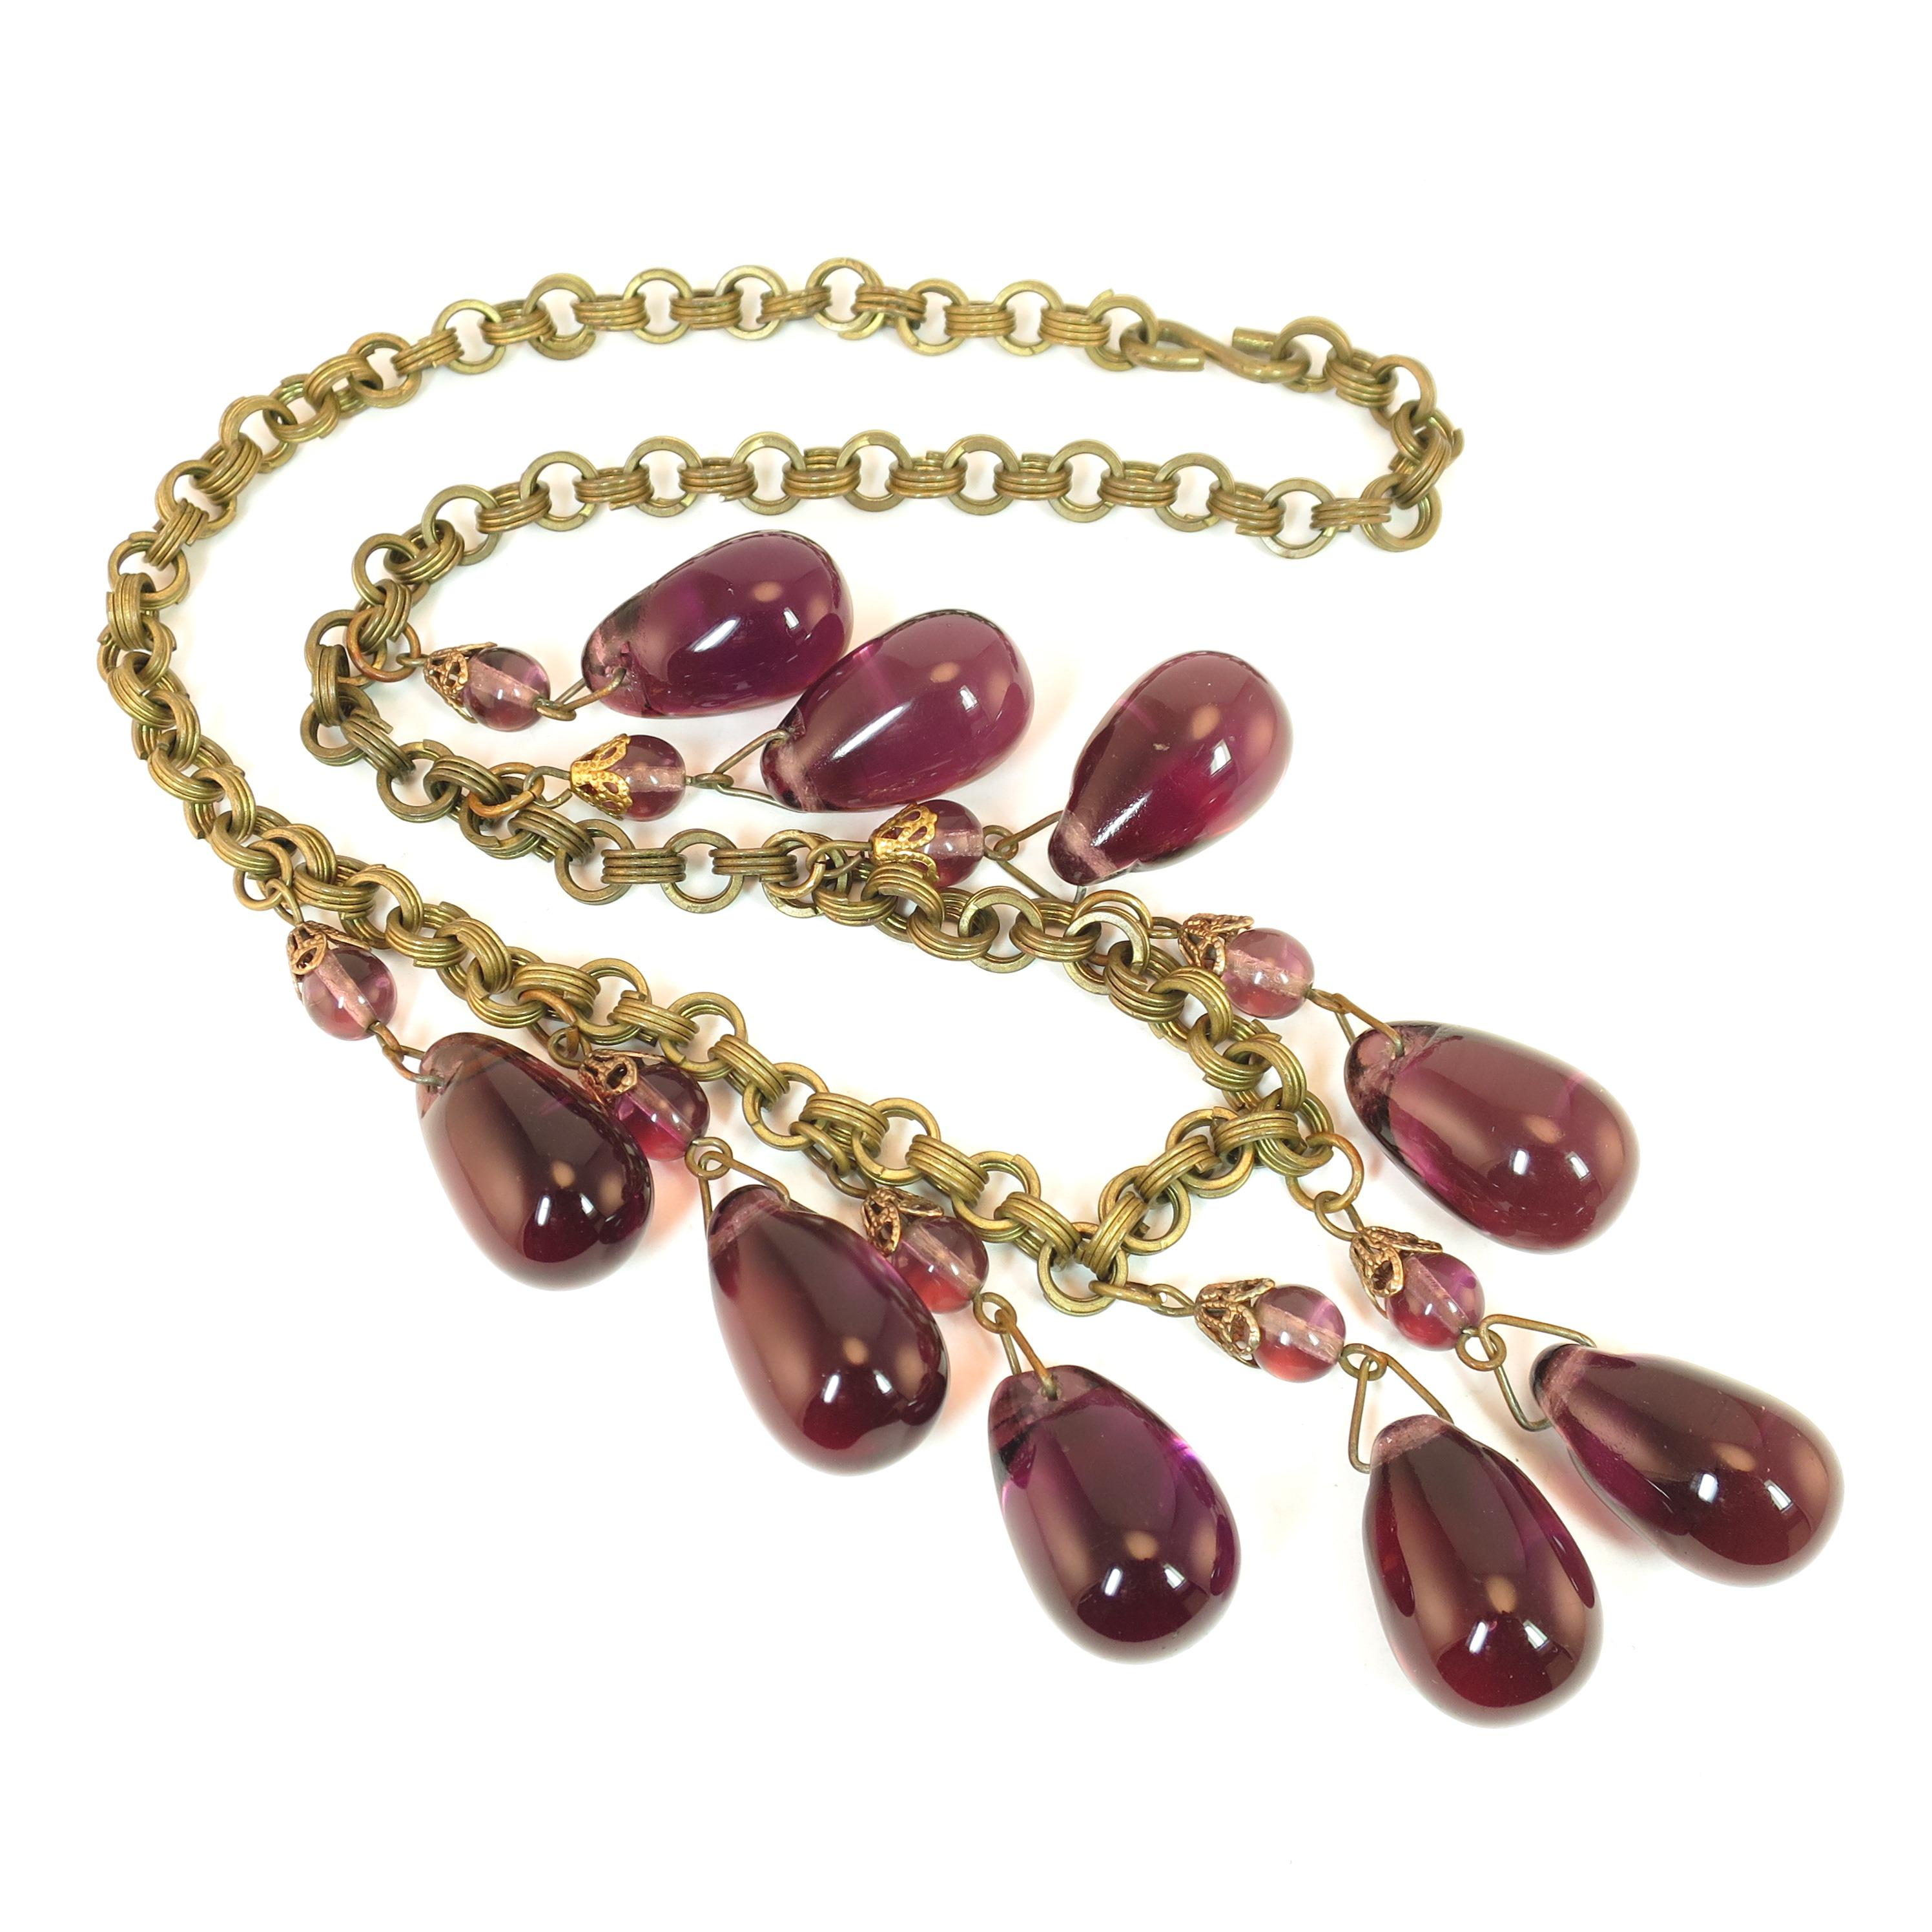 Victorian French Amethyst Poured Glass & Chain Link Necklace, 1870s For Sale 4